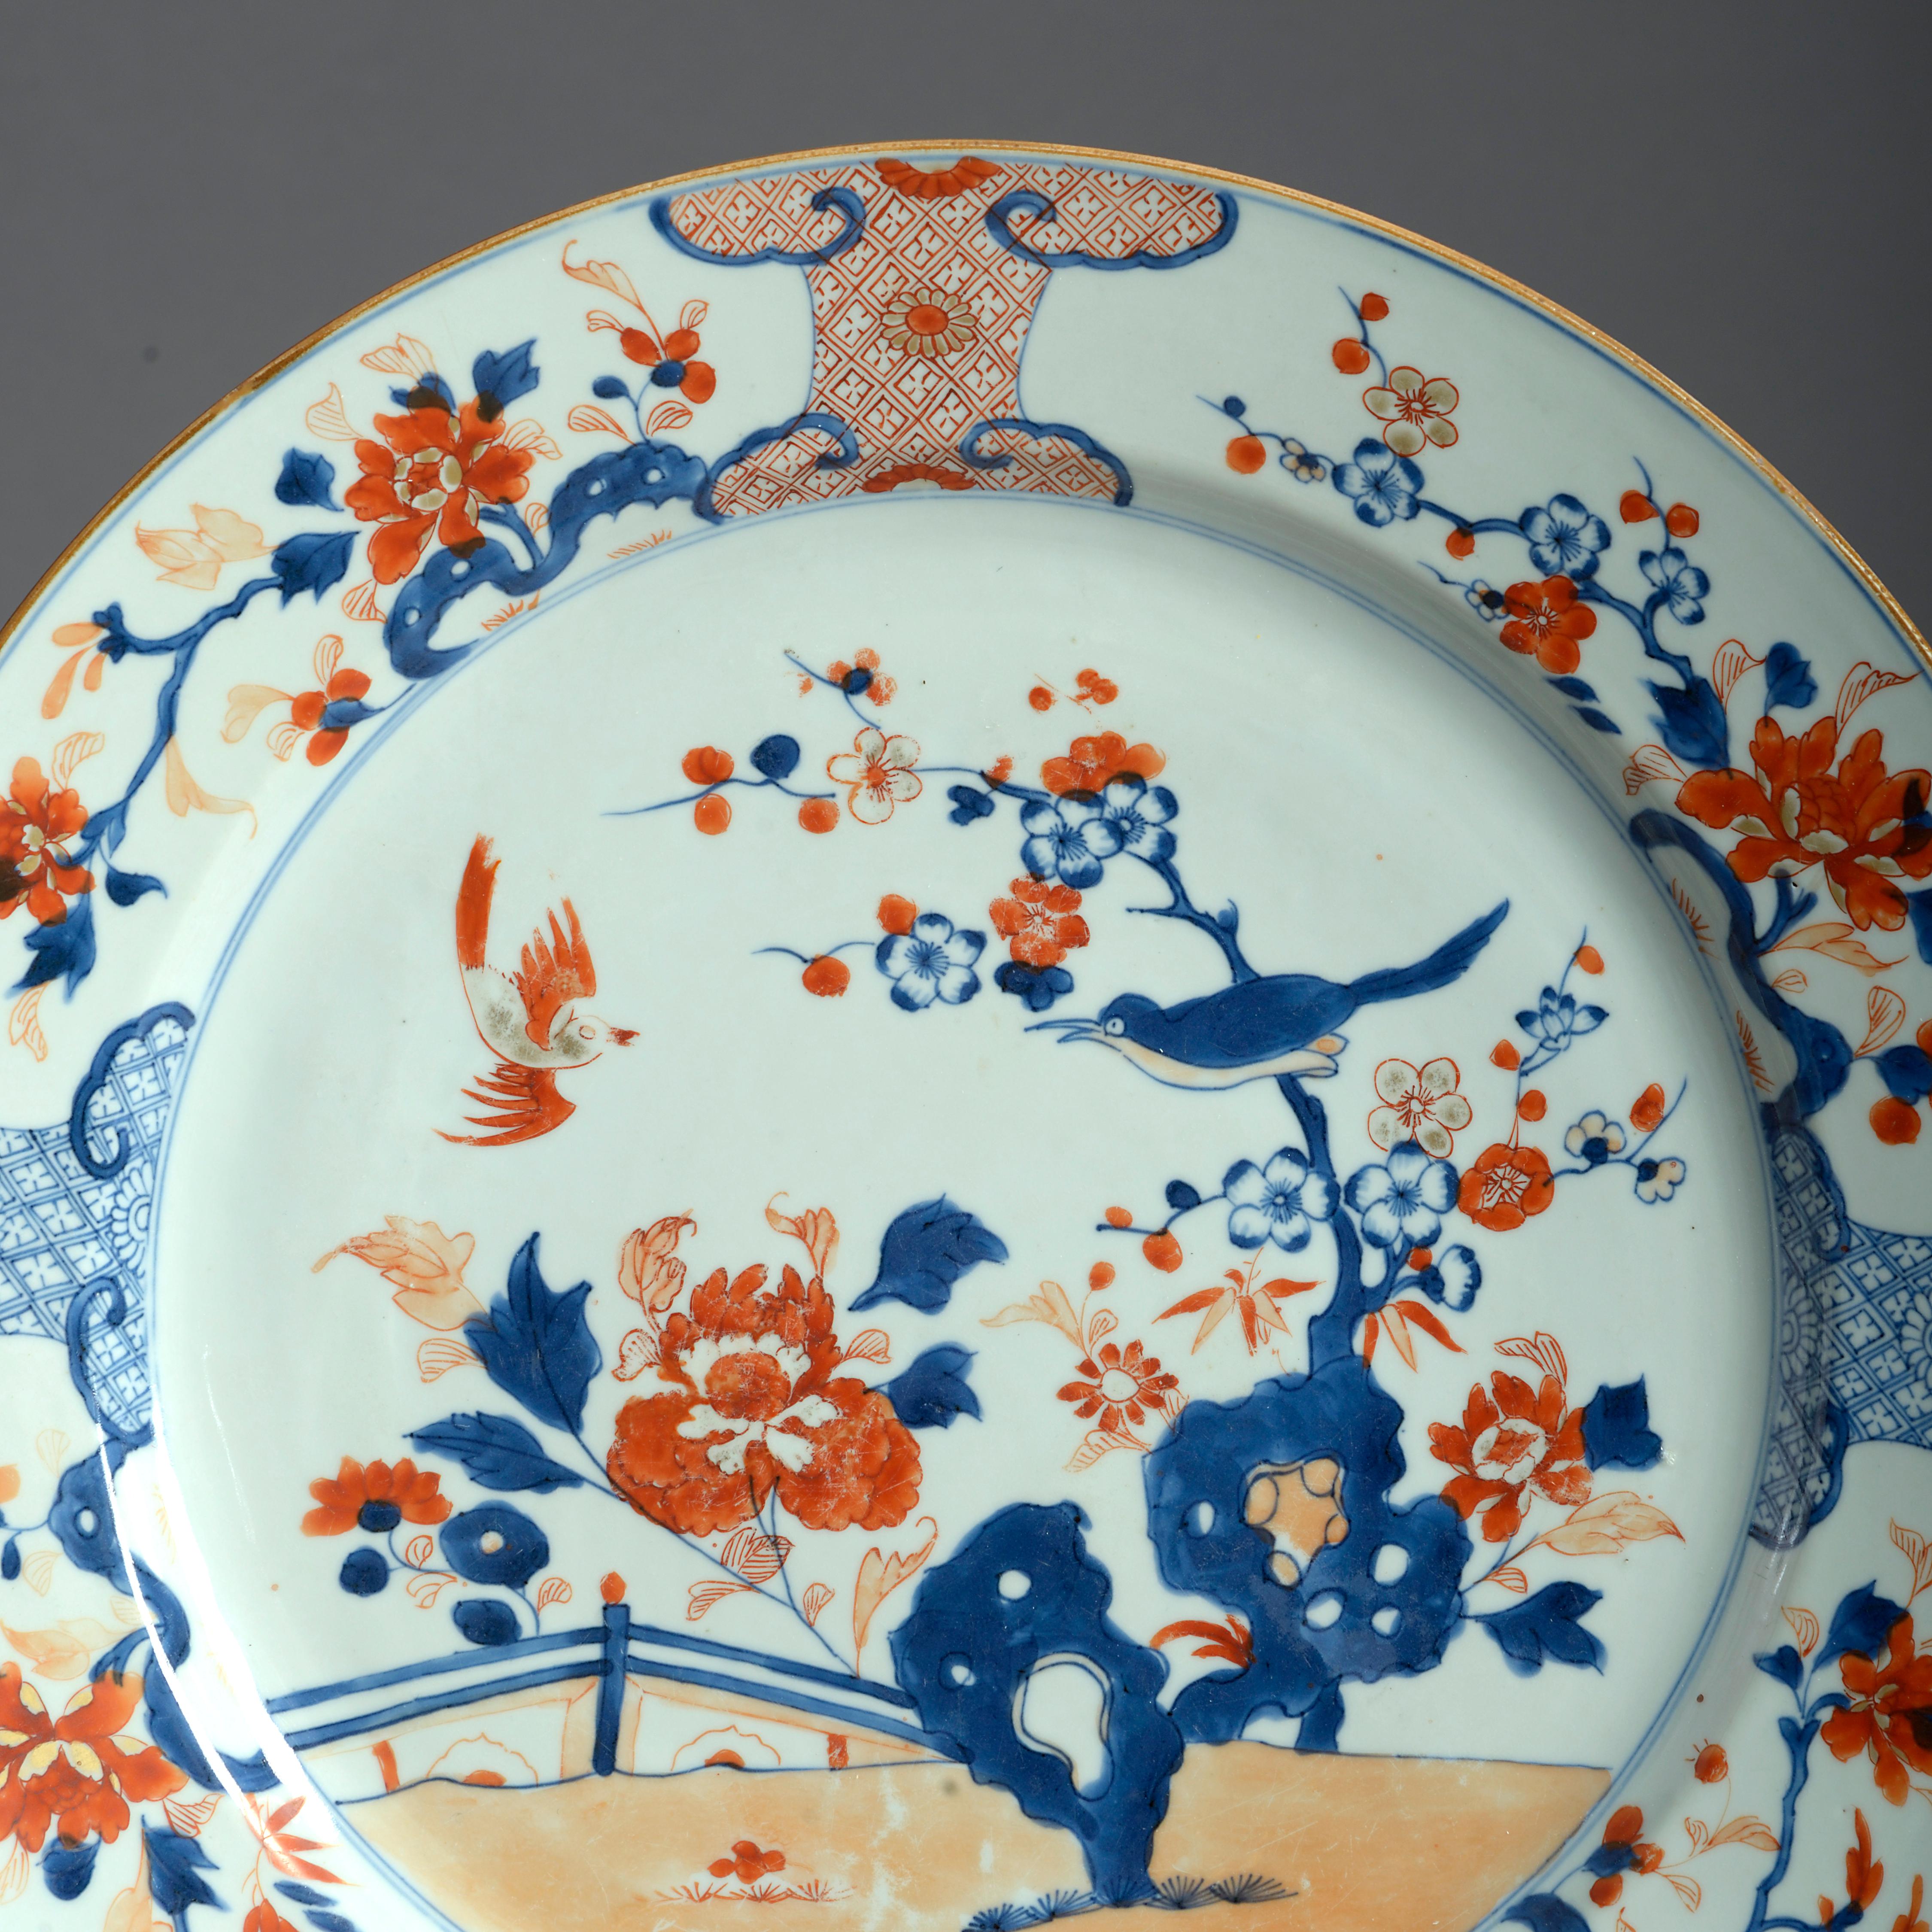 A Chinese Export porcelain charger, decorated in the traditional Imari manner with red, blue and gilded glazes upon a white ground.